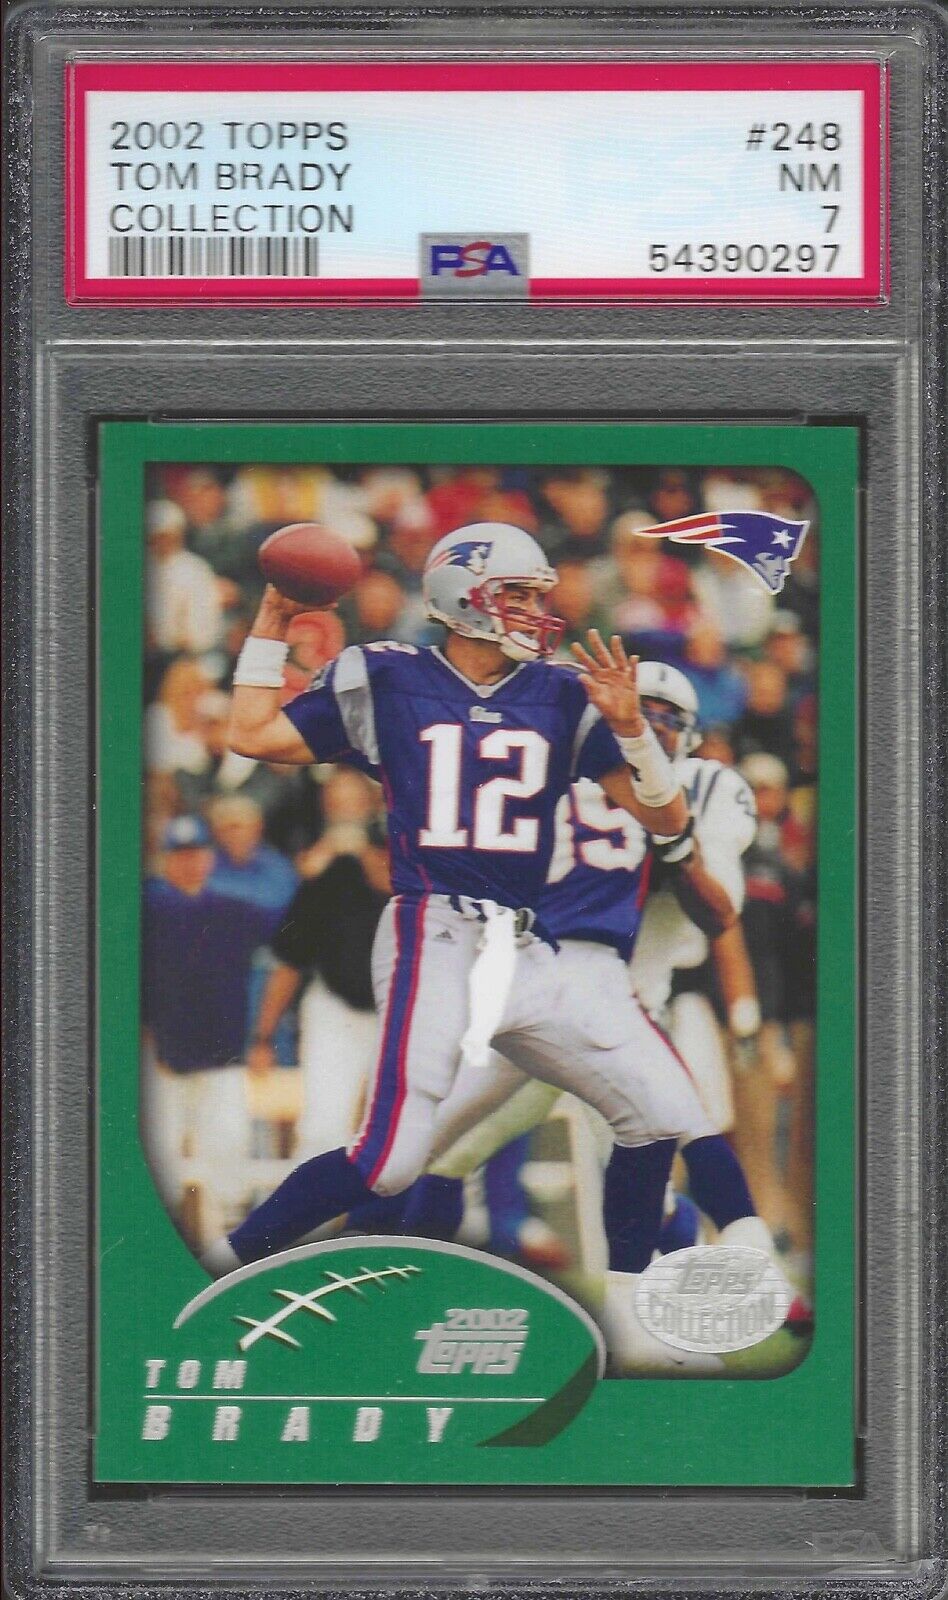 2002 Topps Collection Tom Brady #248 New England Patriots PSA 7 ONLY 50 GRADED